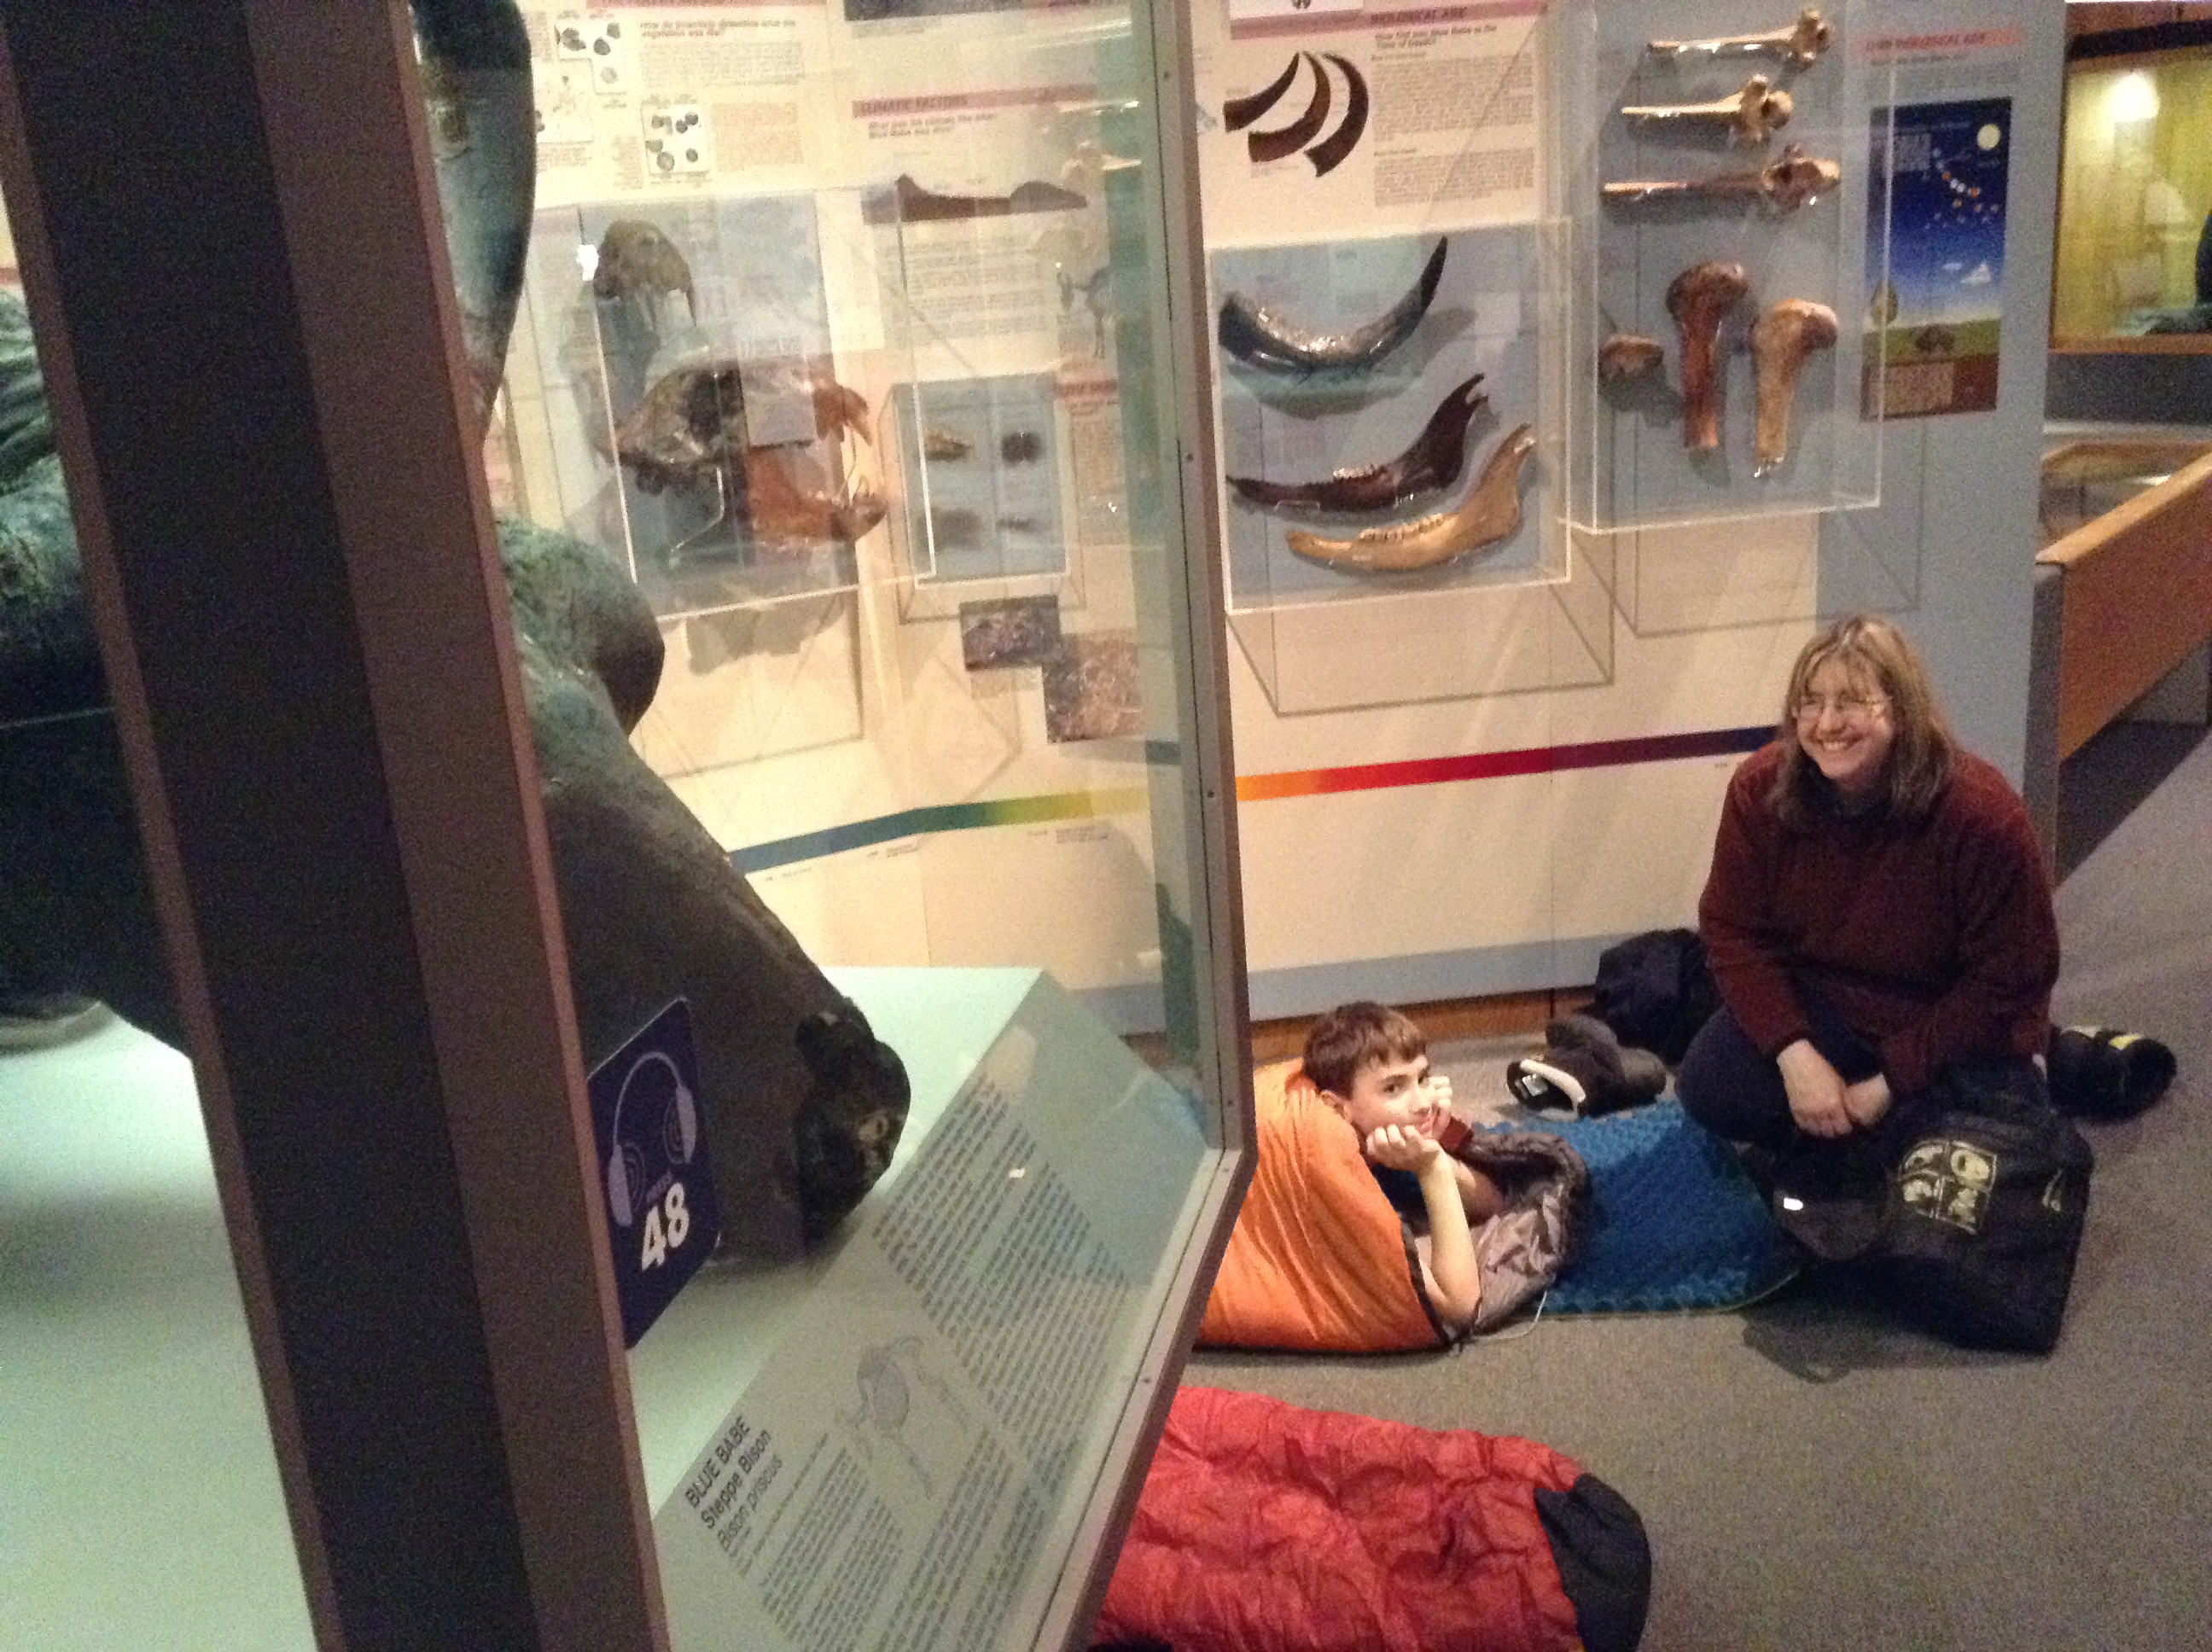 a woman sitting on the floor of a museum beside a child in a sleeping bag, surrounded by display cases